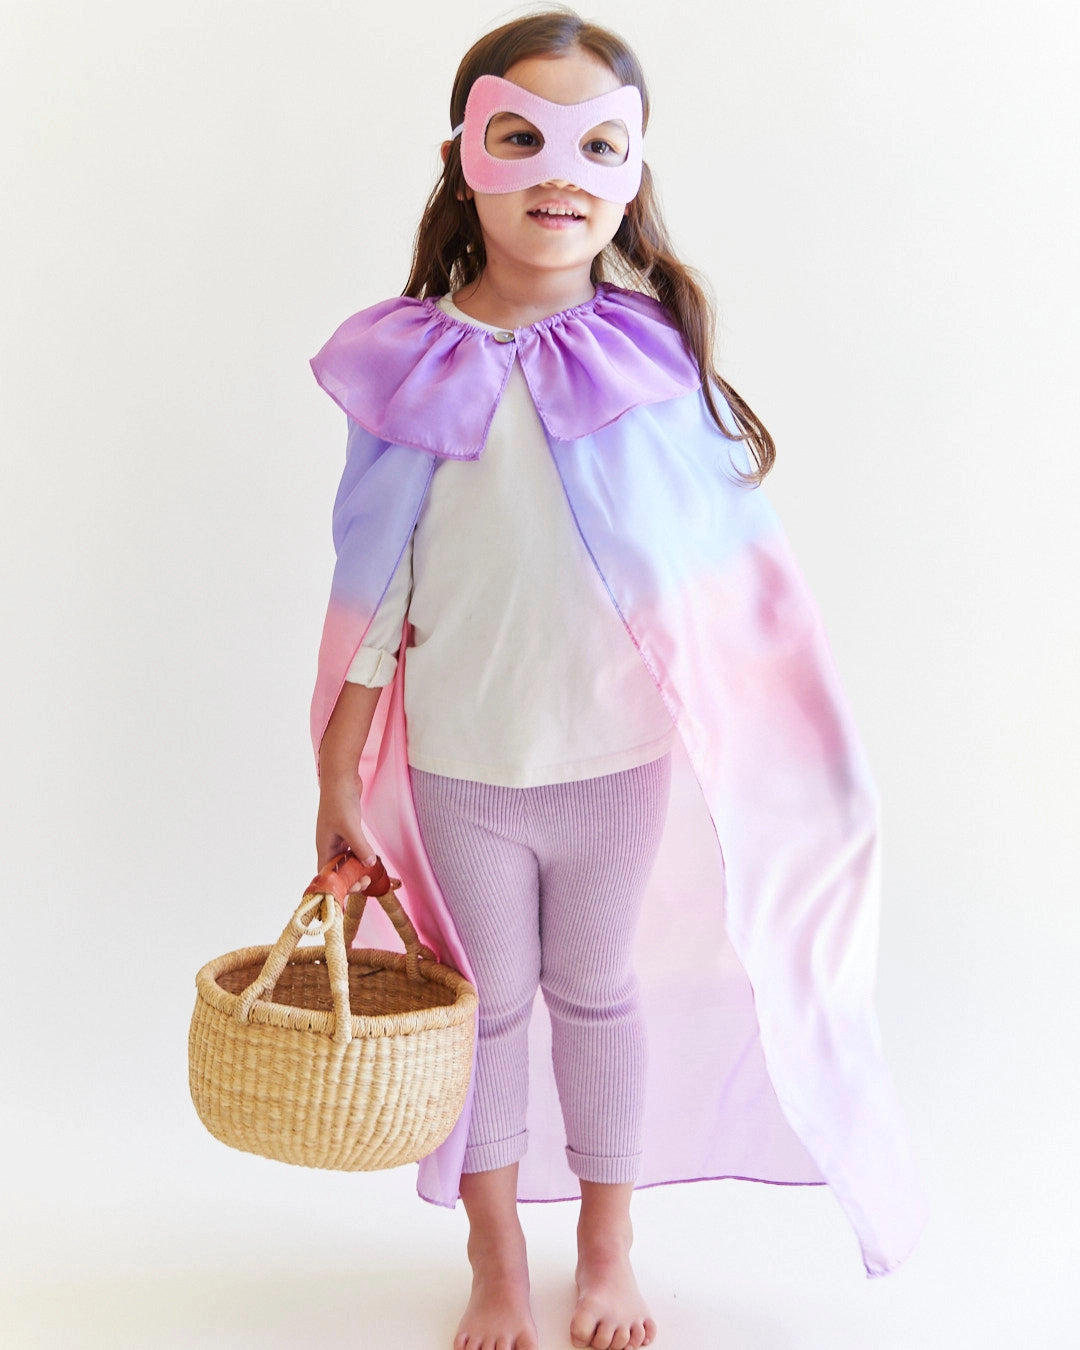 Silk Mask For Dress-Up Pretend Play